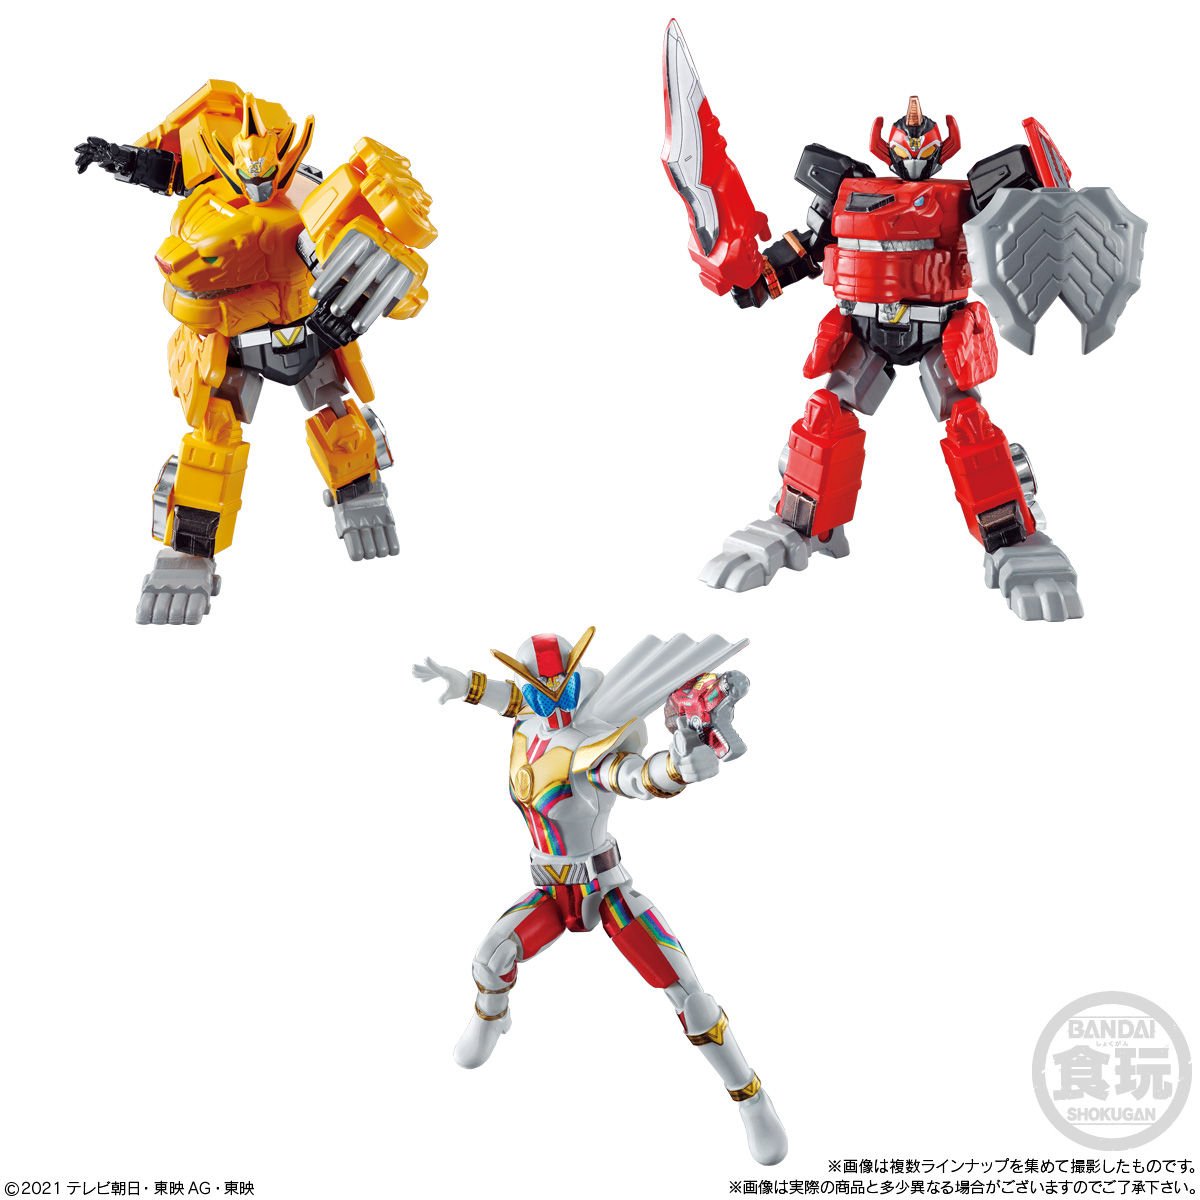 The much-discussed YU-DO Zenkaiger figures are also coming out. Don't forget about that accessory set as well as the plethora of articulation!